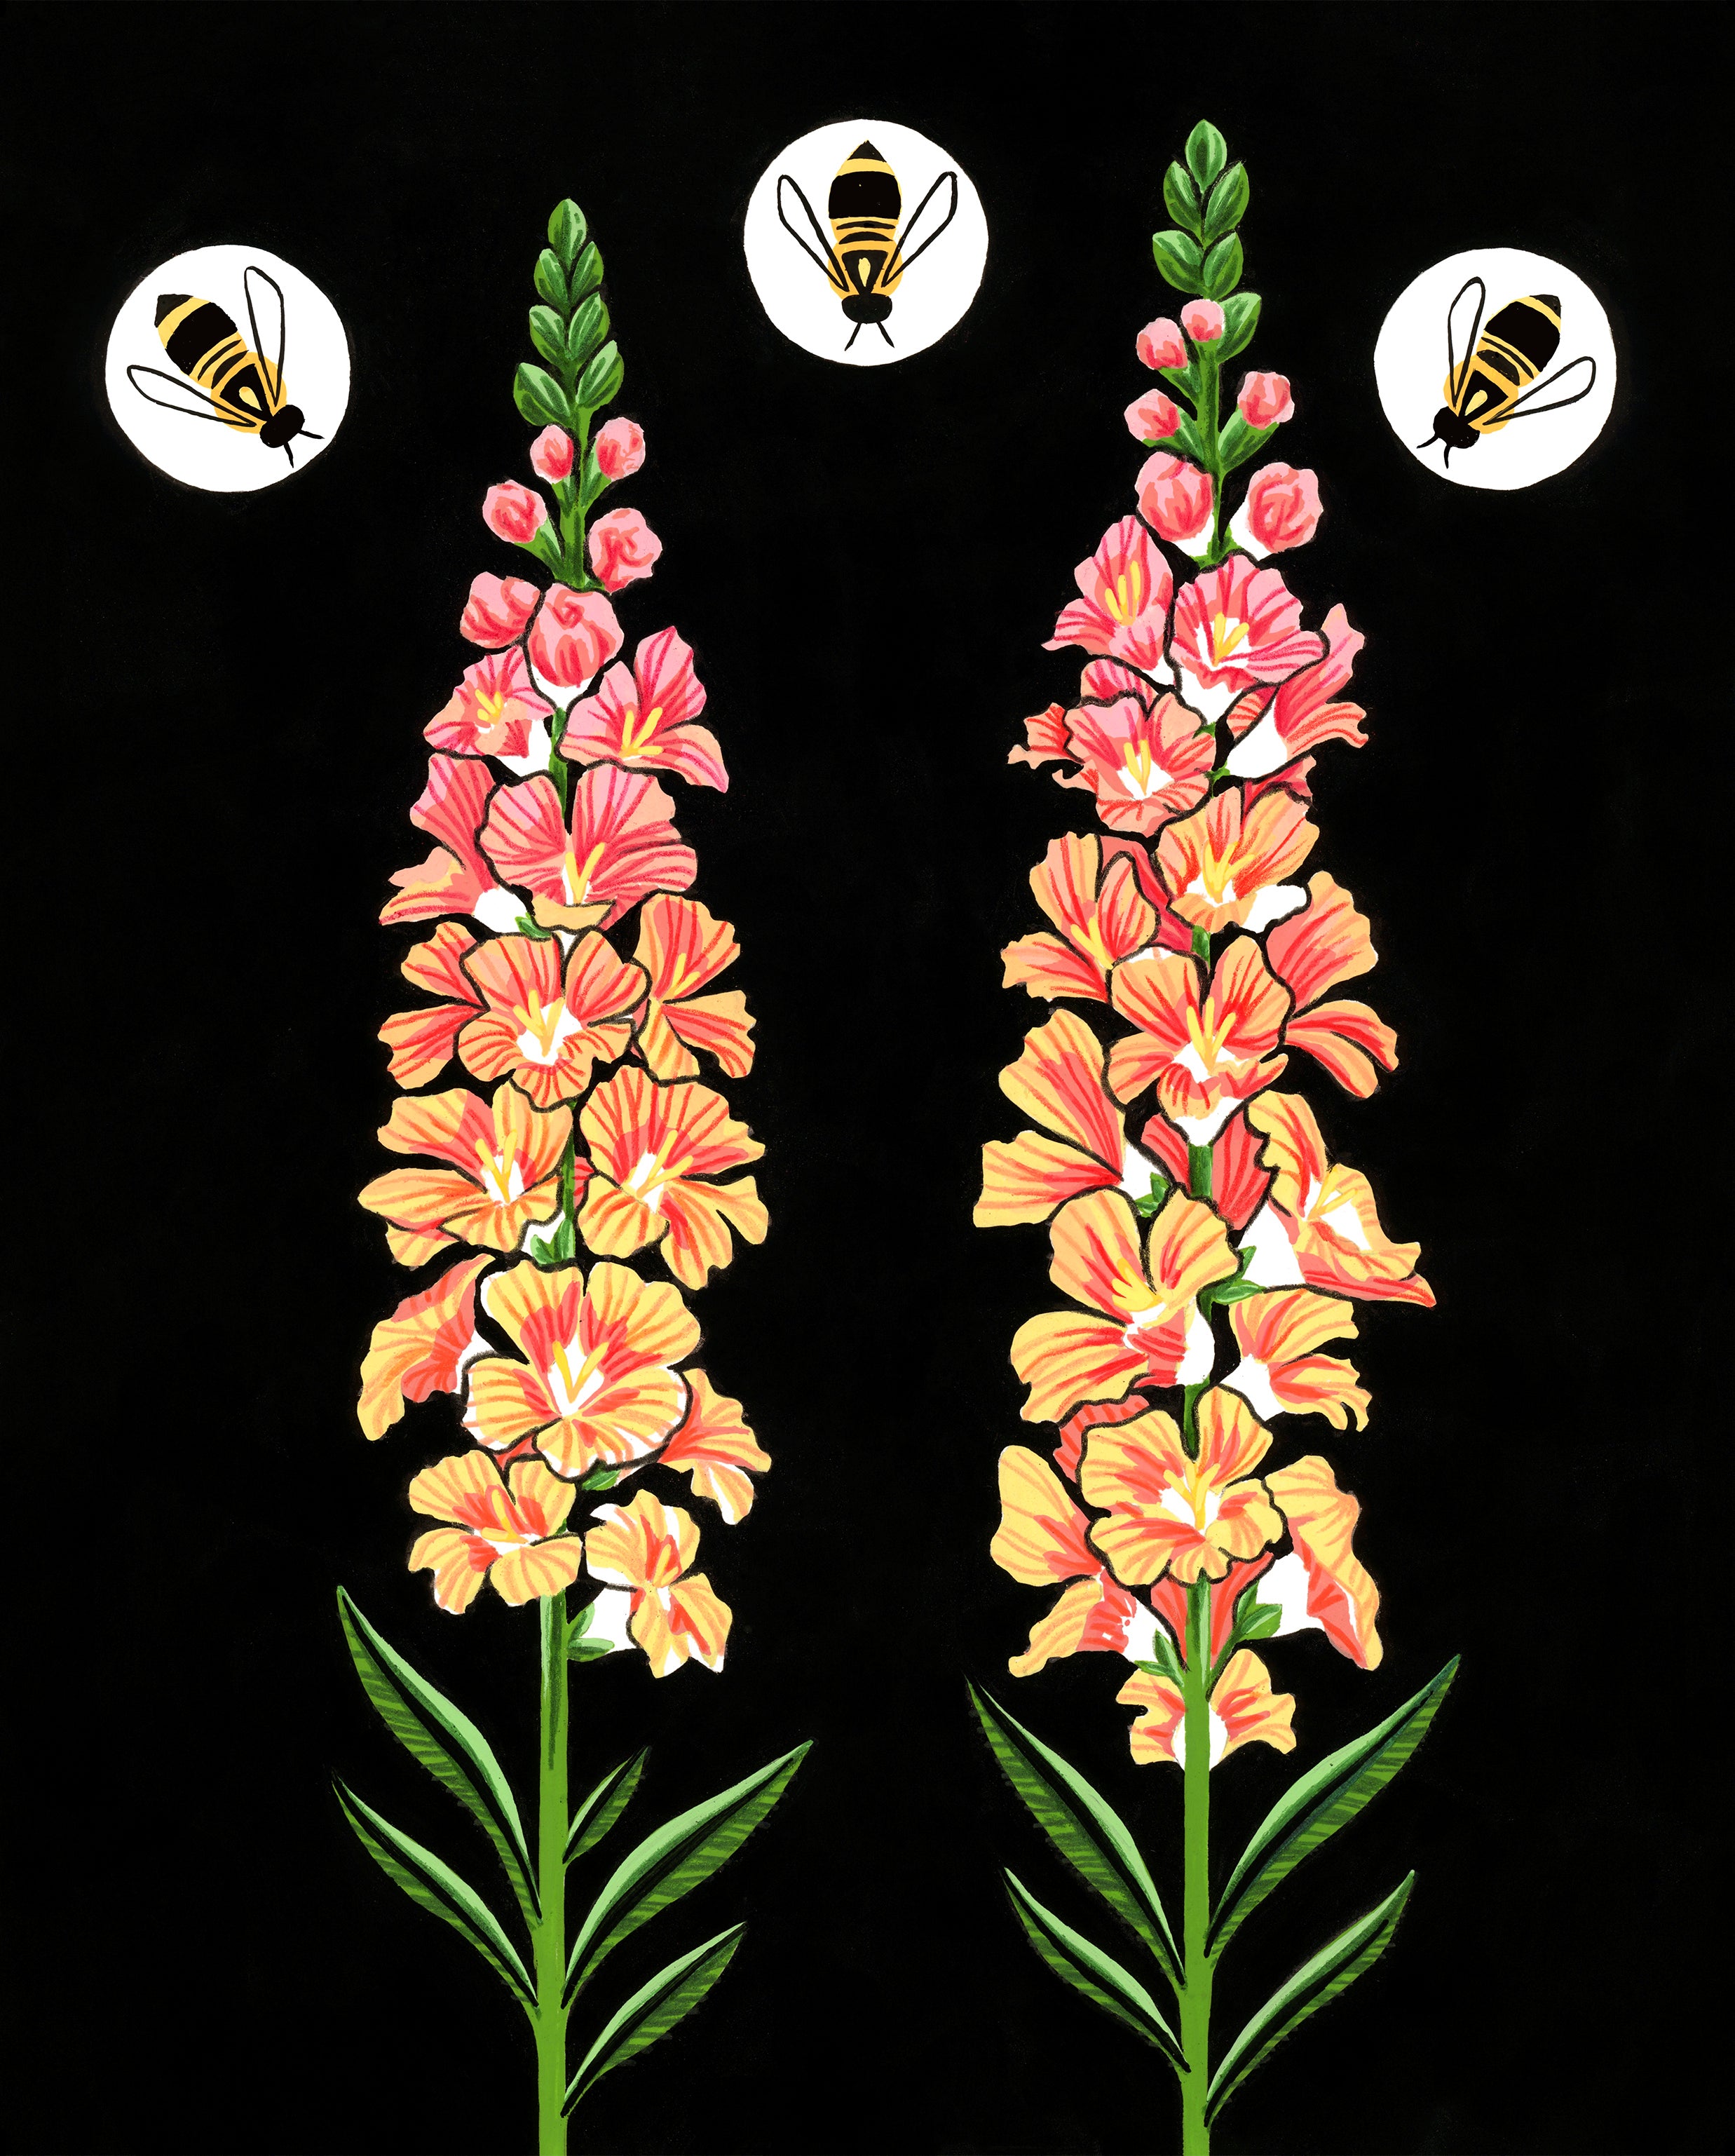 Original painting of honeybees and snapdragons